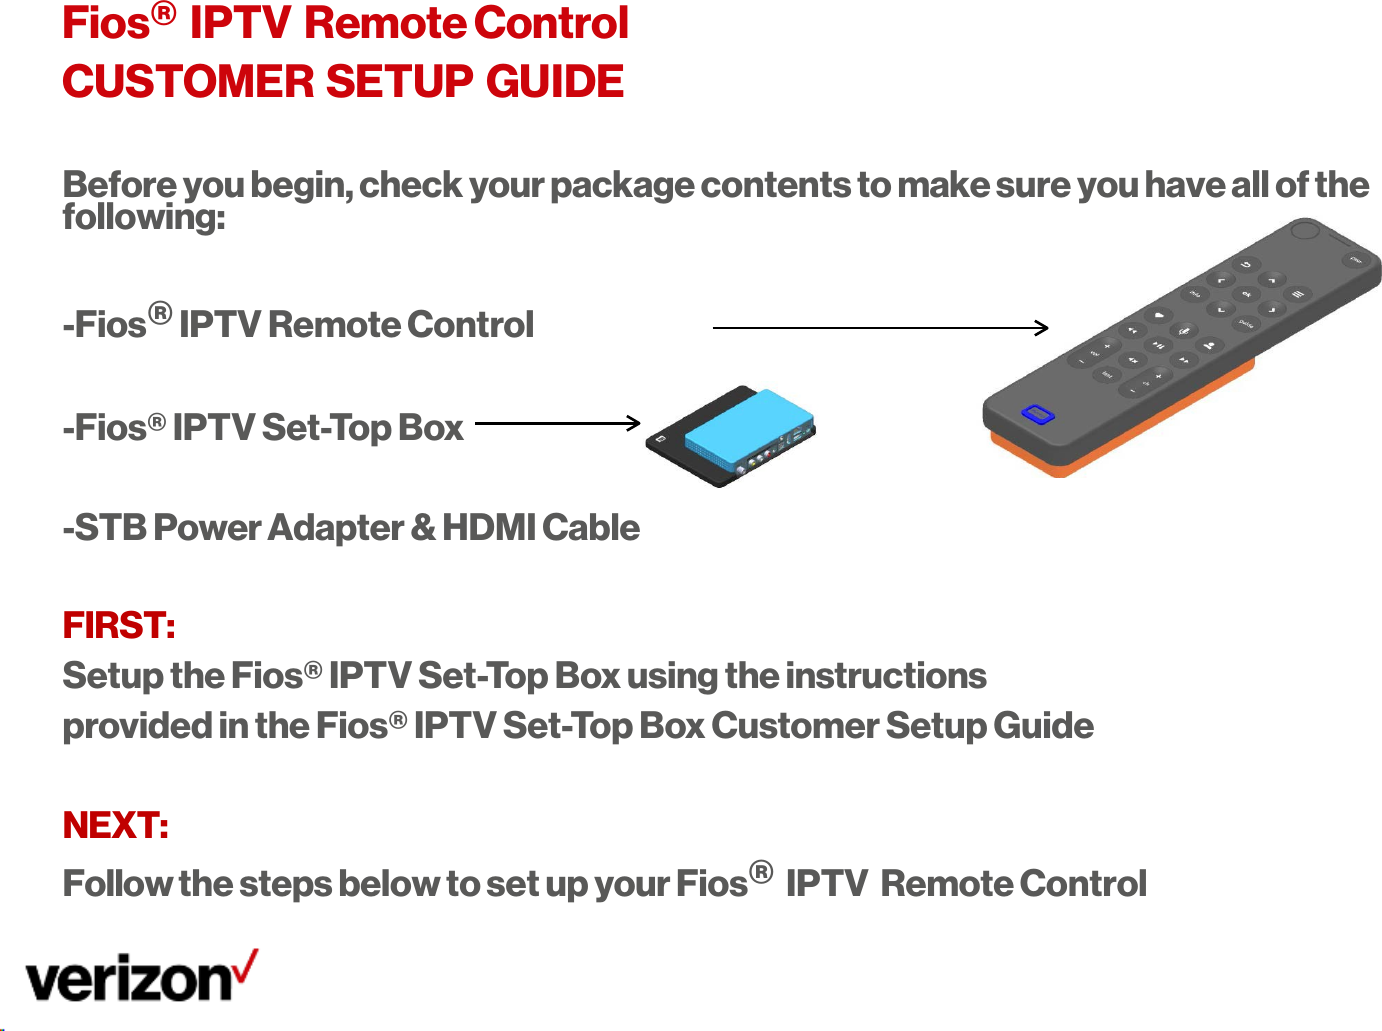       Fios® IPTV Remote Control CUSTOMER SETUP GUIDE  Before you begin, check your package contents to make sure you have all of the following:  -Fios® IPTV Remote Control  -Fios® IPTV Set-Top Box -STB Power Adapter &amp; HDMI Cable FIRST: Setup the Fios® IPTV Set-Top Box using the instructions provided in the Fios® IPTV Set-Top Box Customer Setup Guide  NEXT: Follow the steps below to set up your Fios® IPTV  Remote Control 